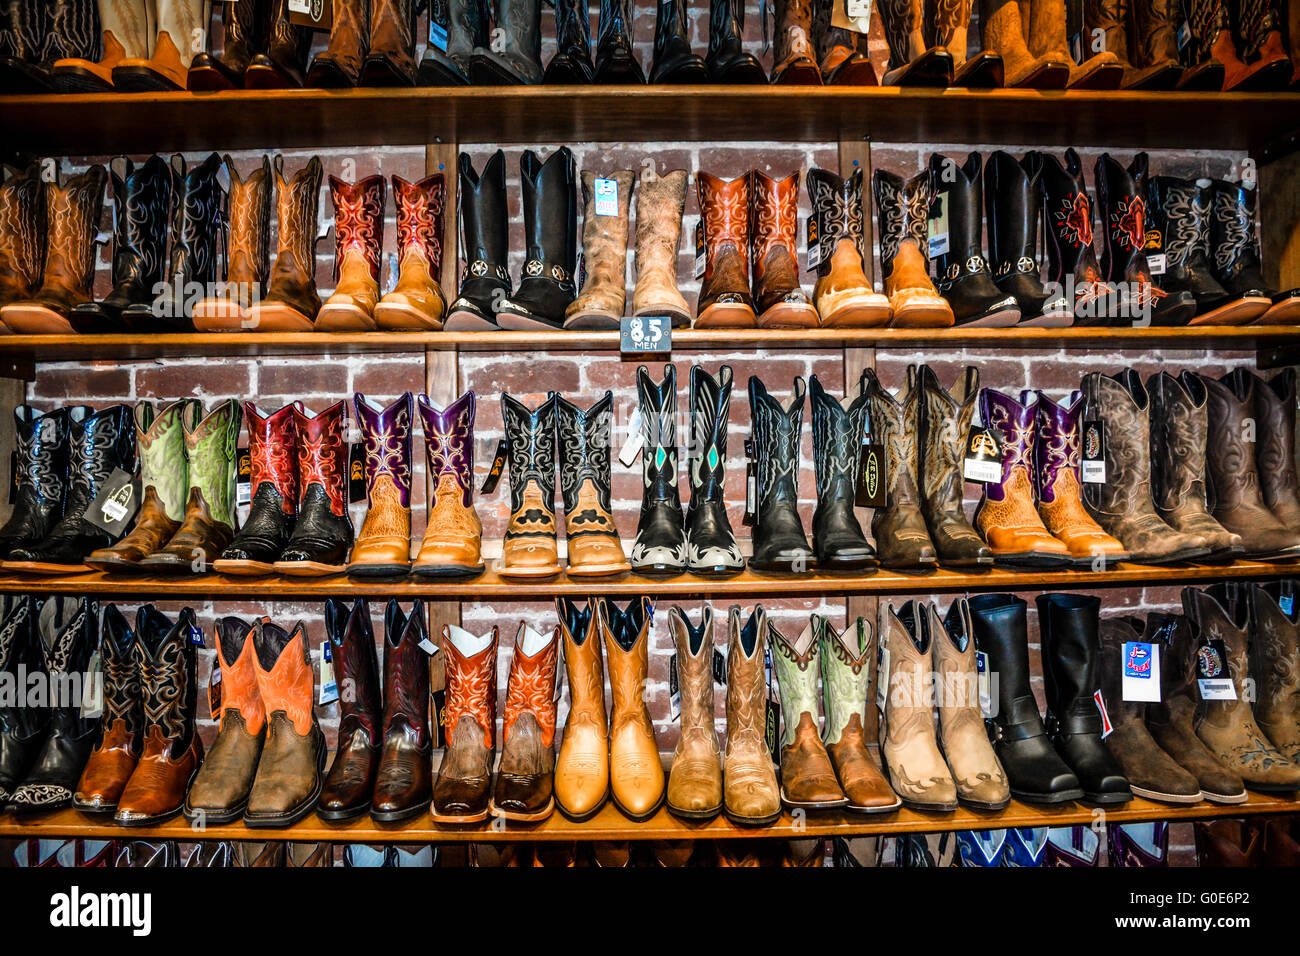 The Nashville Cowboy boot store has rows of unique Cowboy boots for sale in  the downtown entertainment district in Nashville TN Stock Photo - Alamy